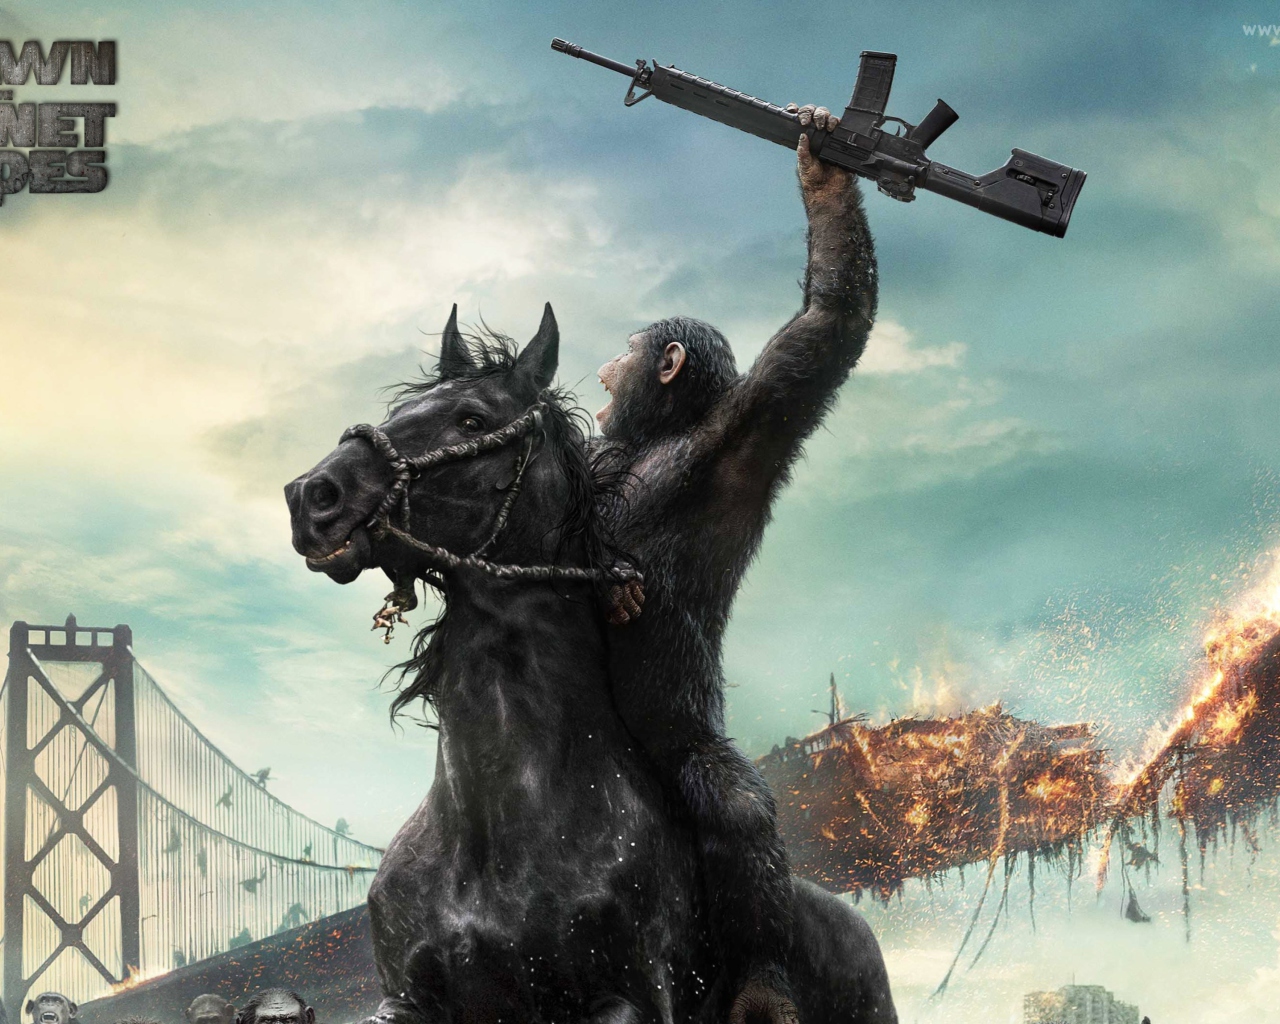 Dawn Of The Planet Of The Apes Movie screenshot #1 1280x1024